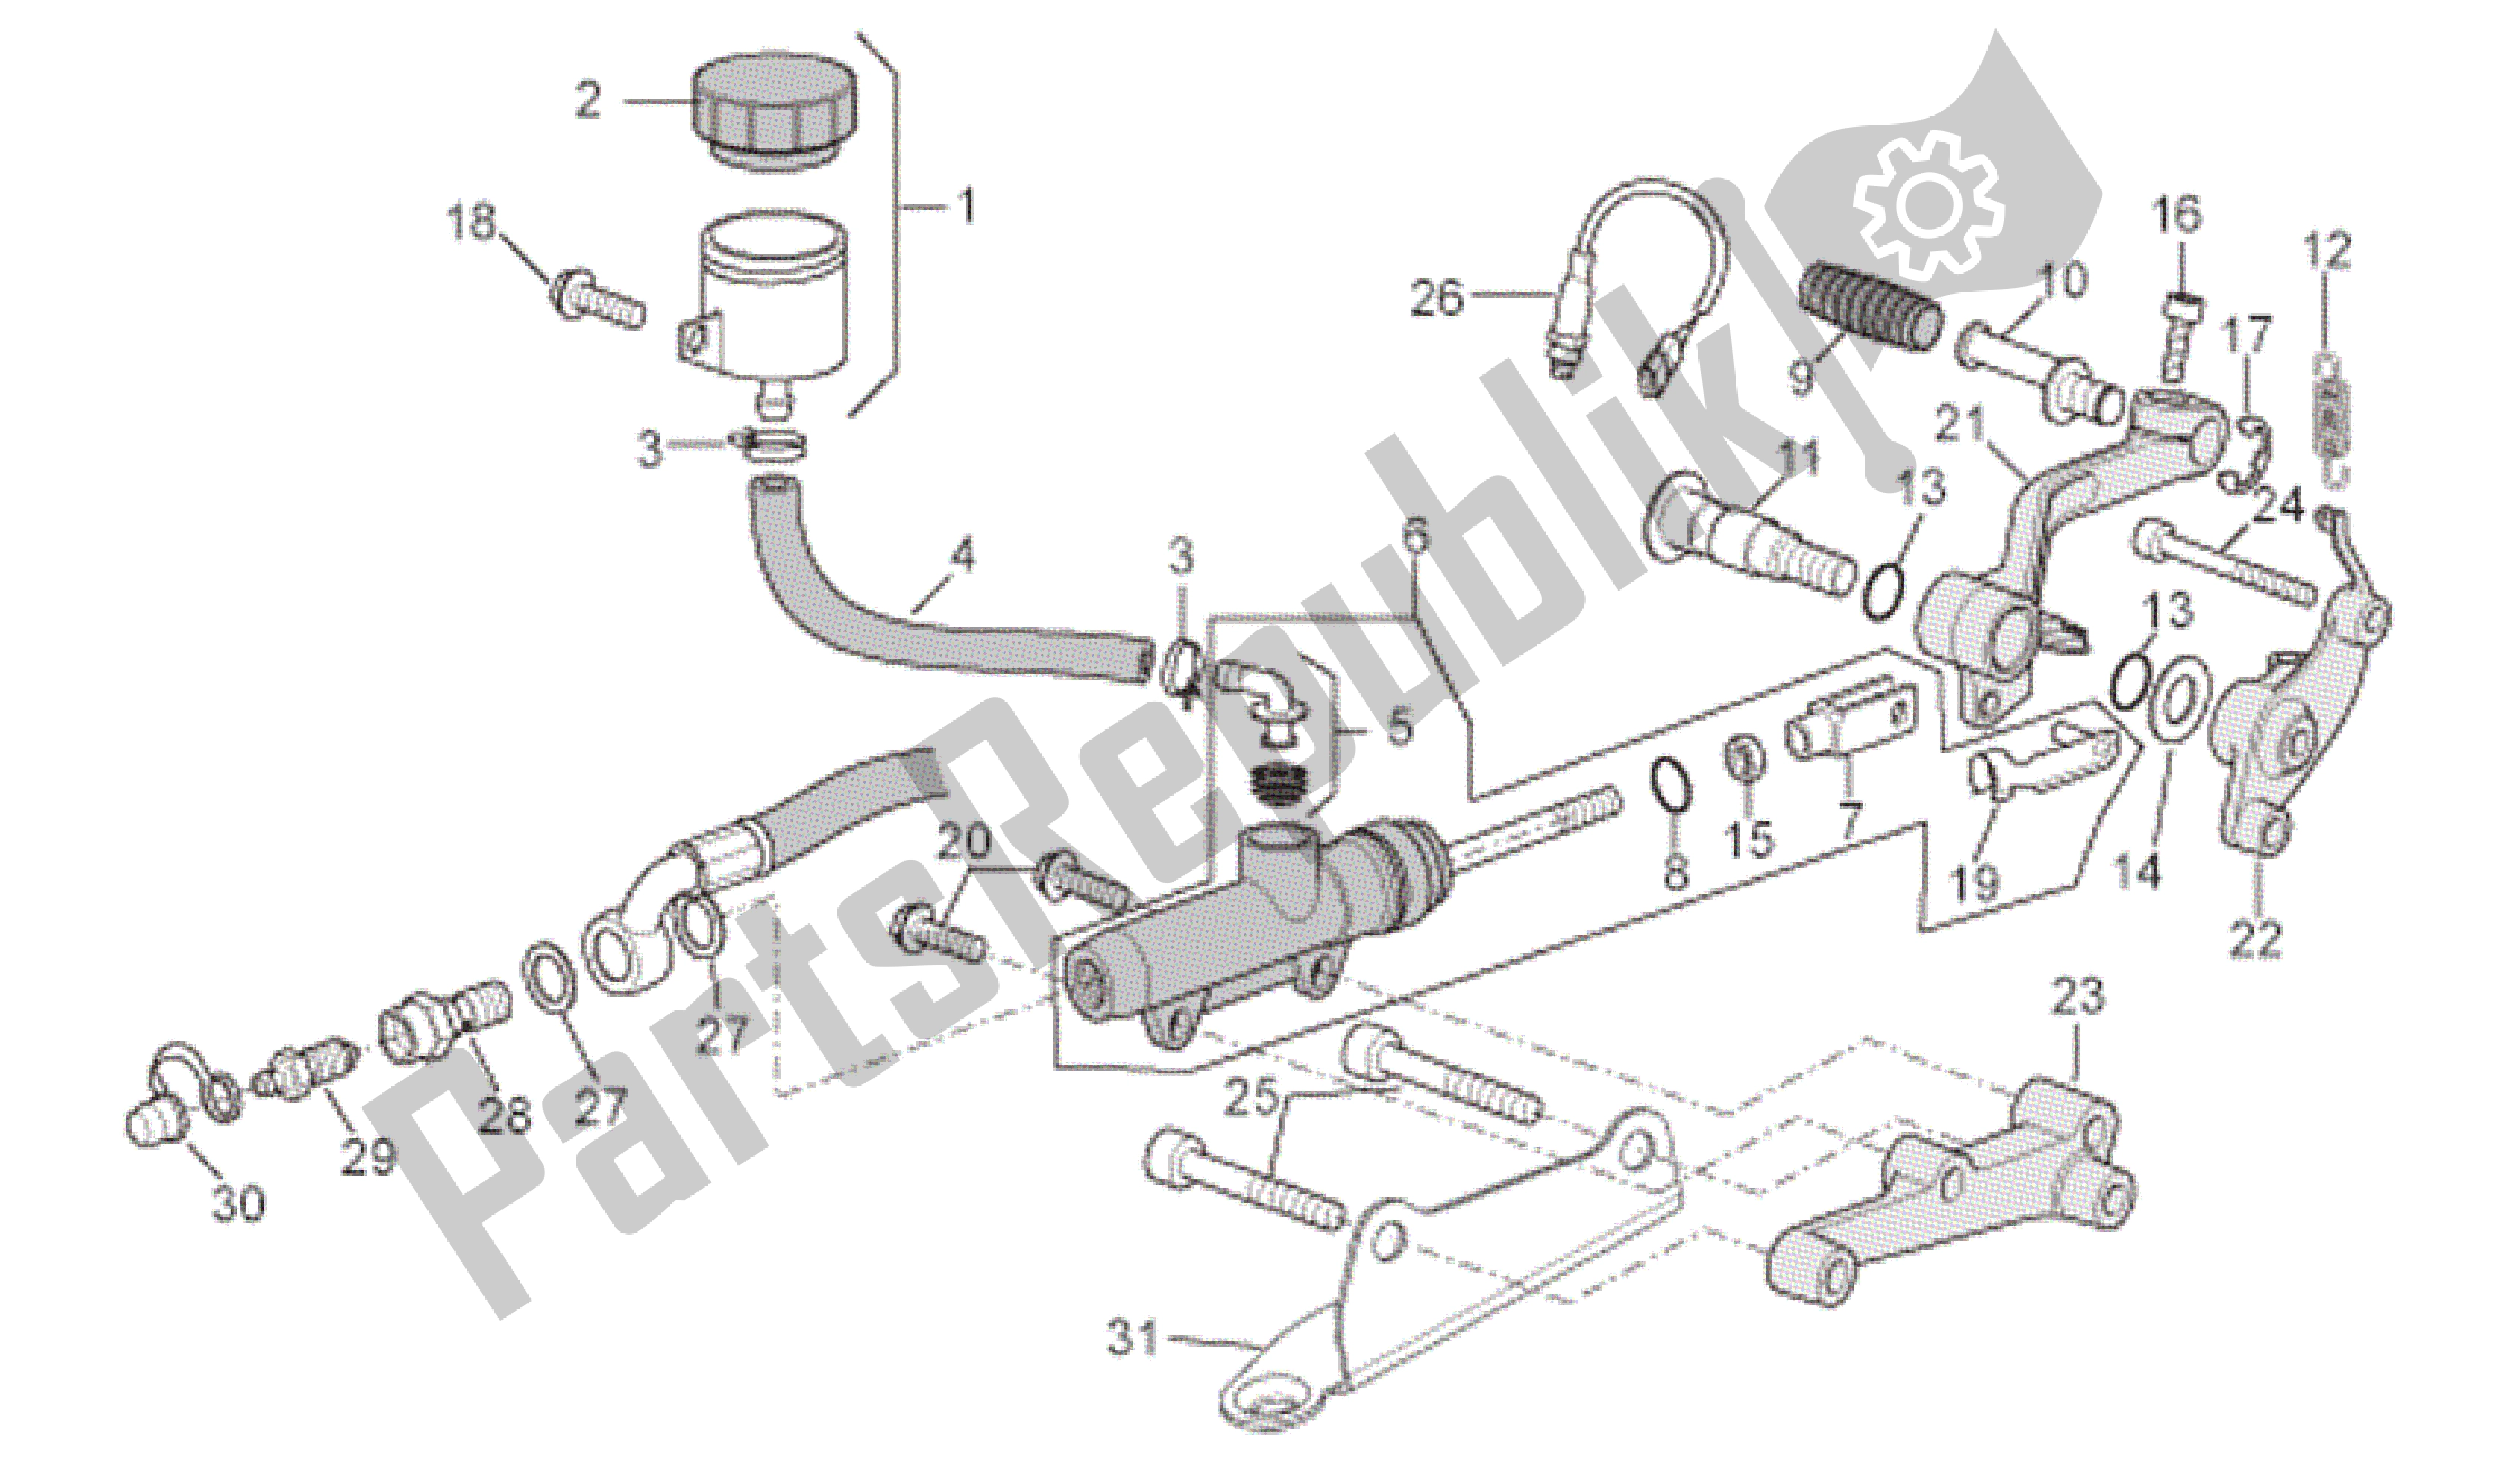 All parts for the Rear Master Cylinder of the Aprilia RSV Tuono Factory 3985 1000 2006 - 2009